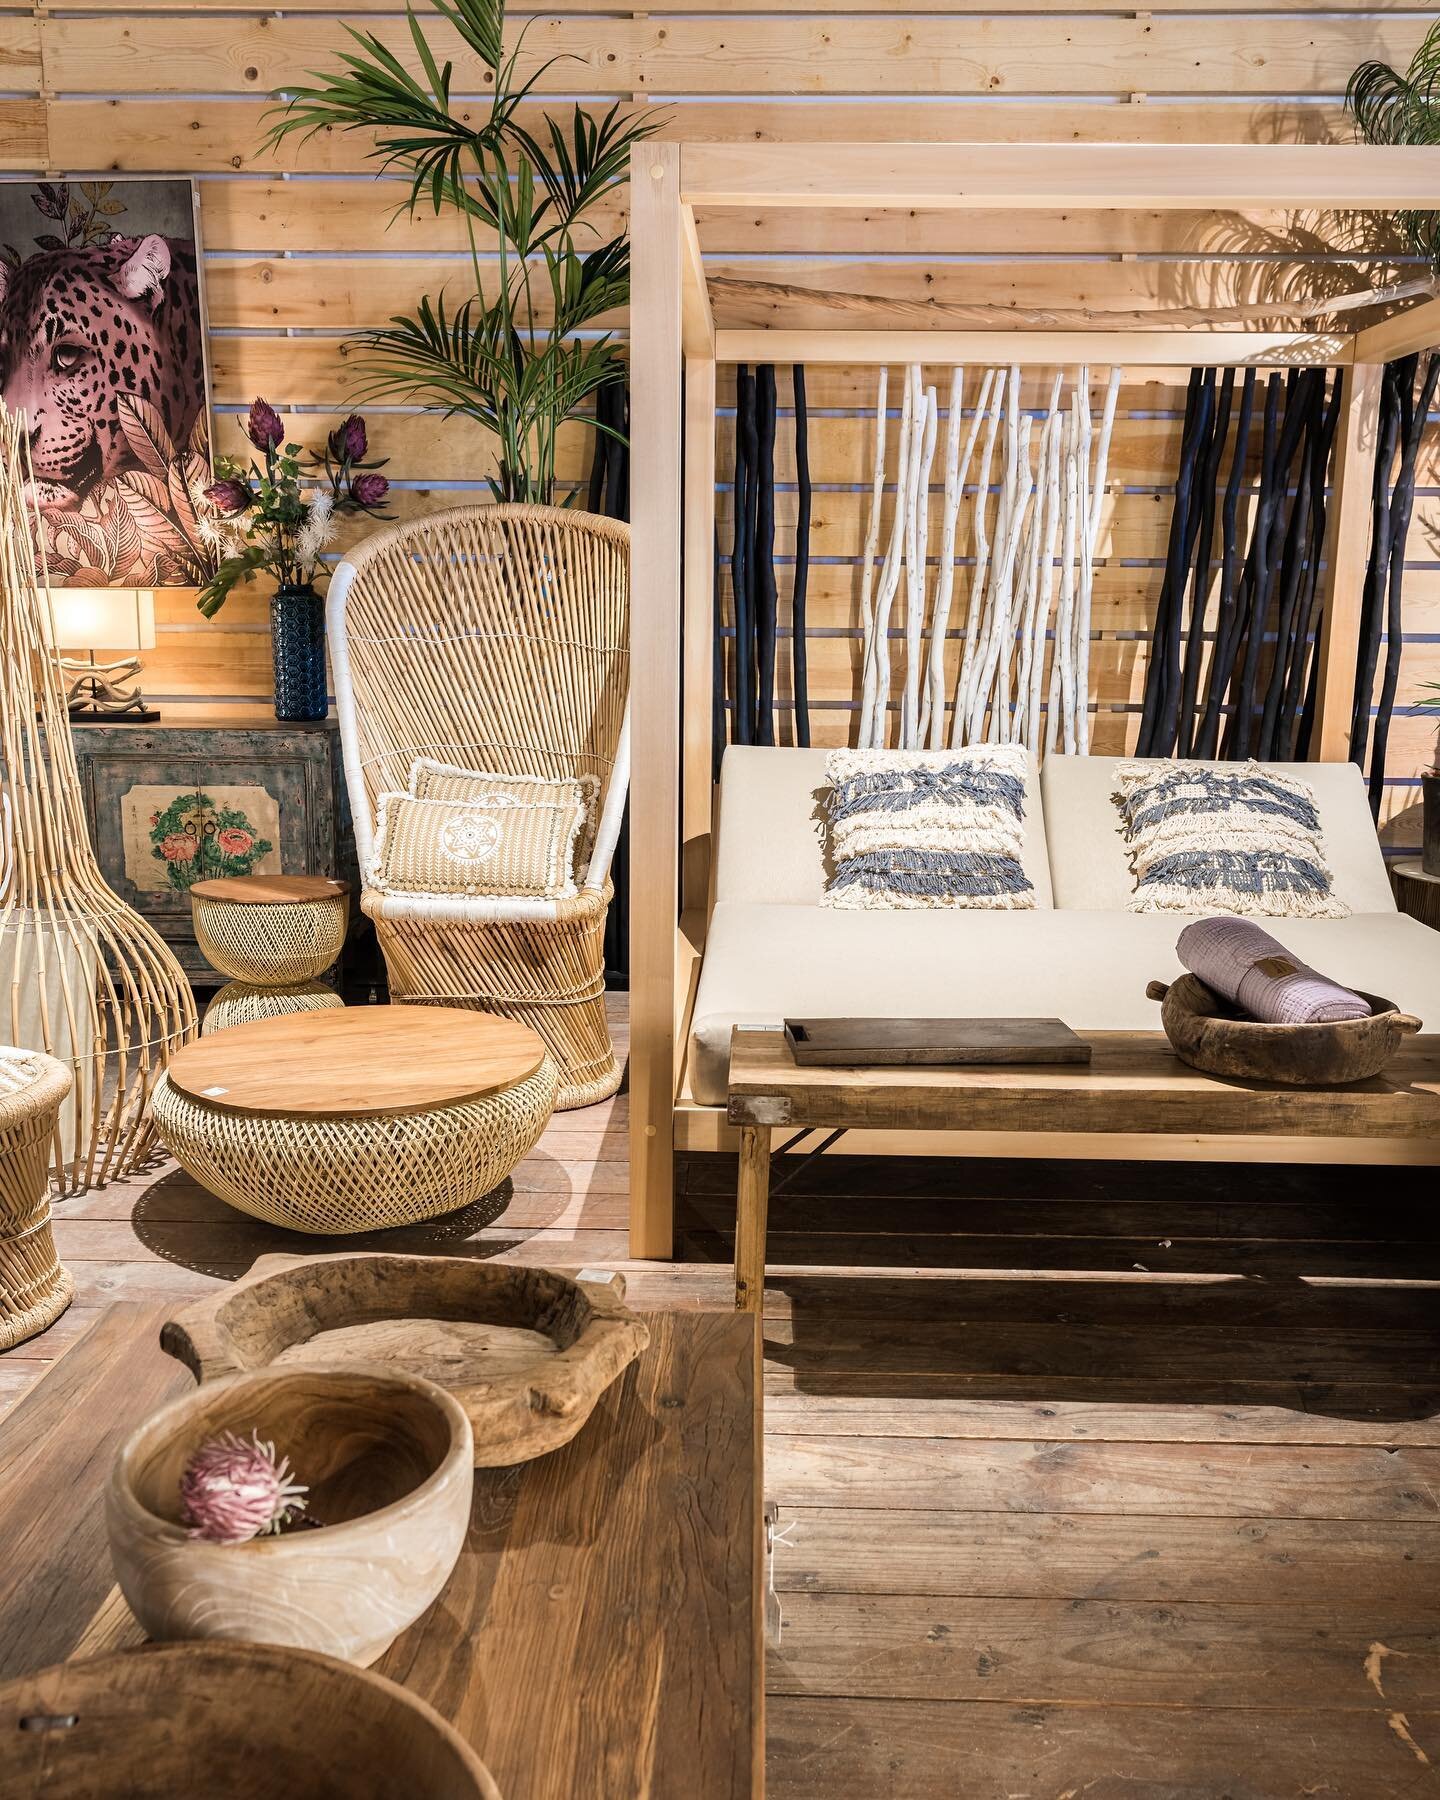 Transform your home with our selection of natural and rustic furniture. Visit us today at our store in Ibiza @livingmoodibiza